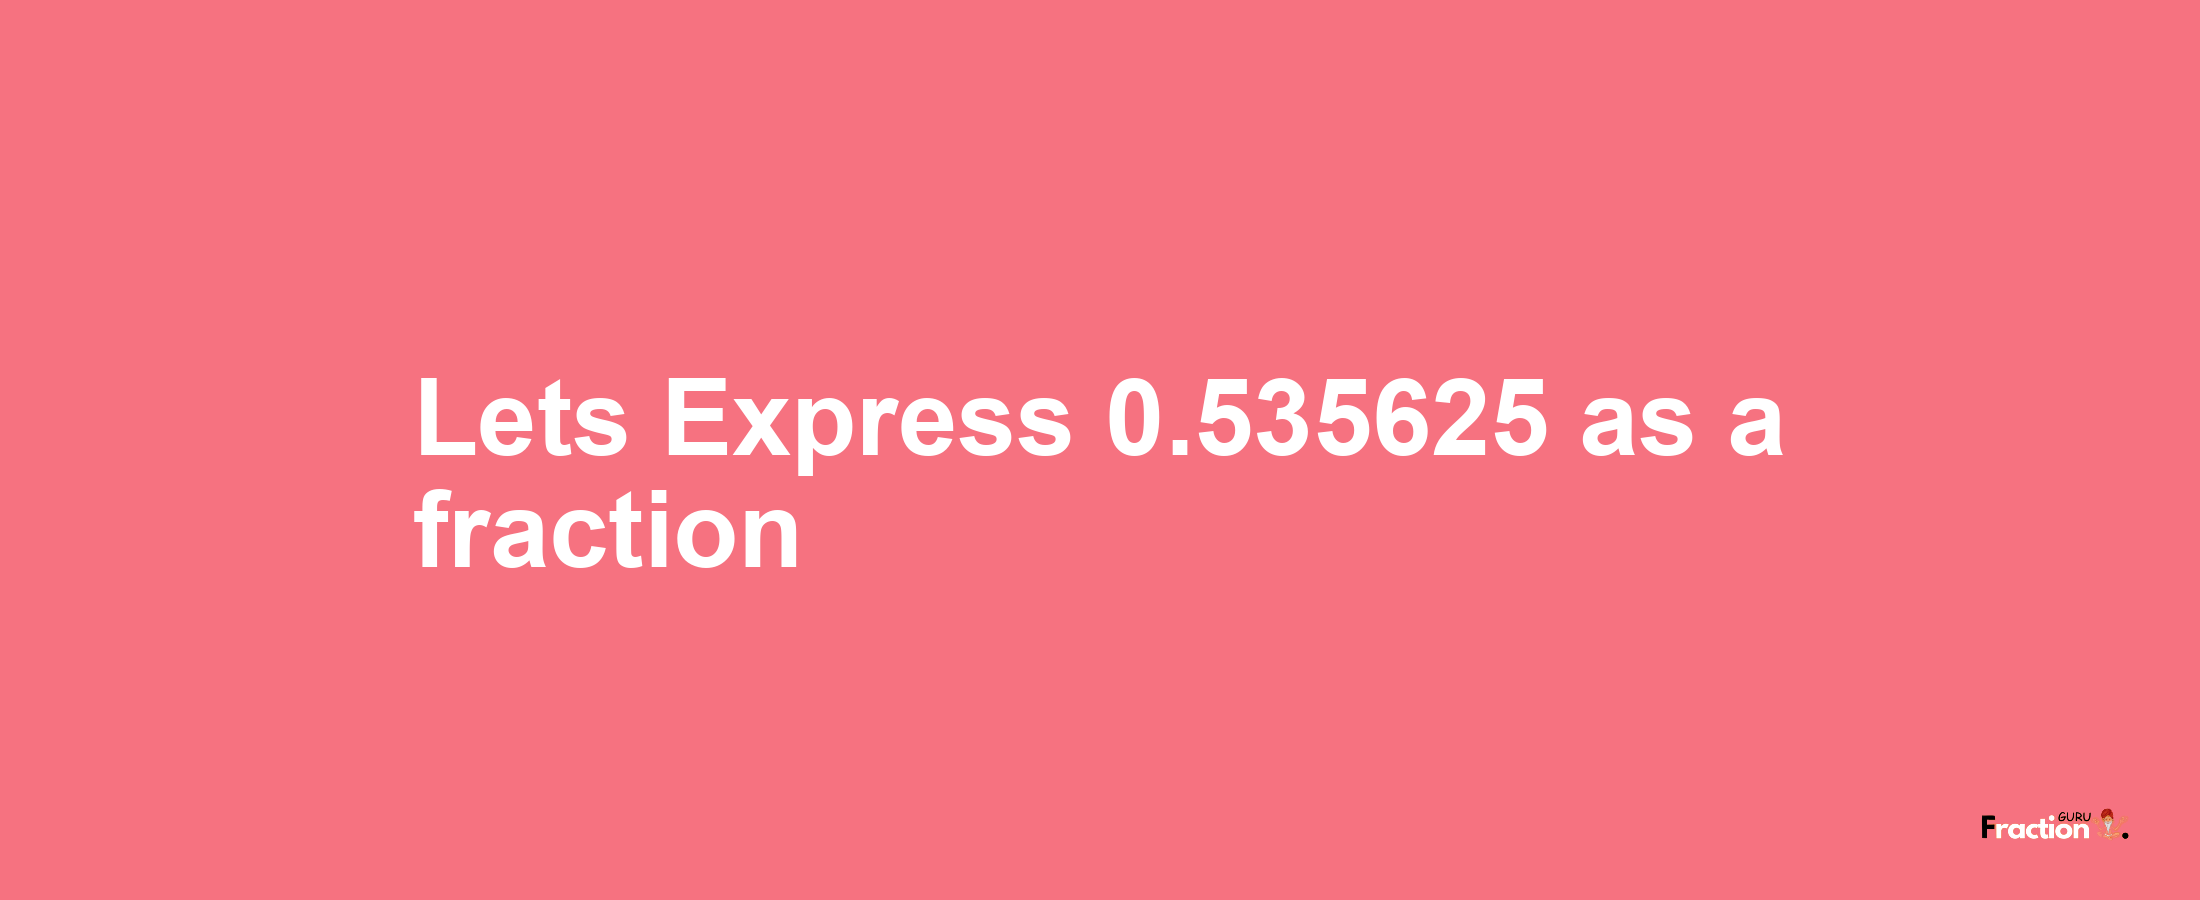 Lets Express 0.535625 as afraction